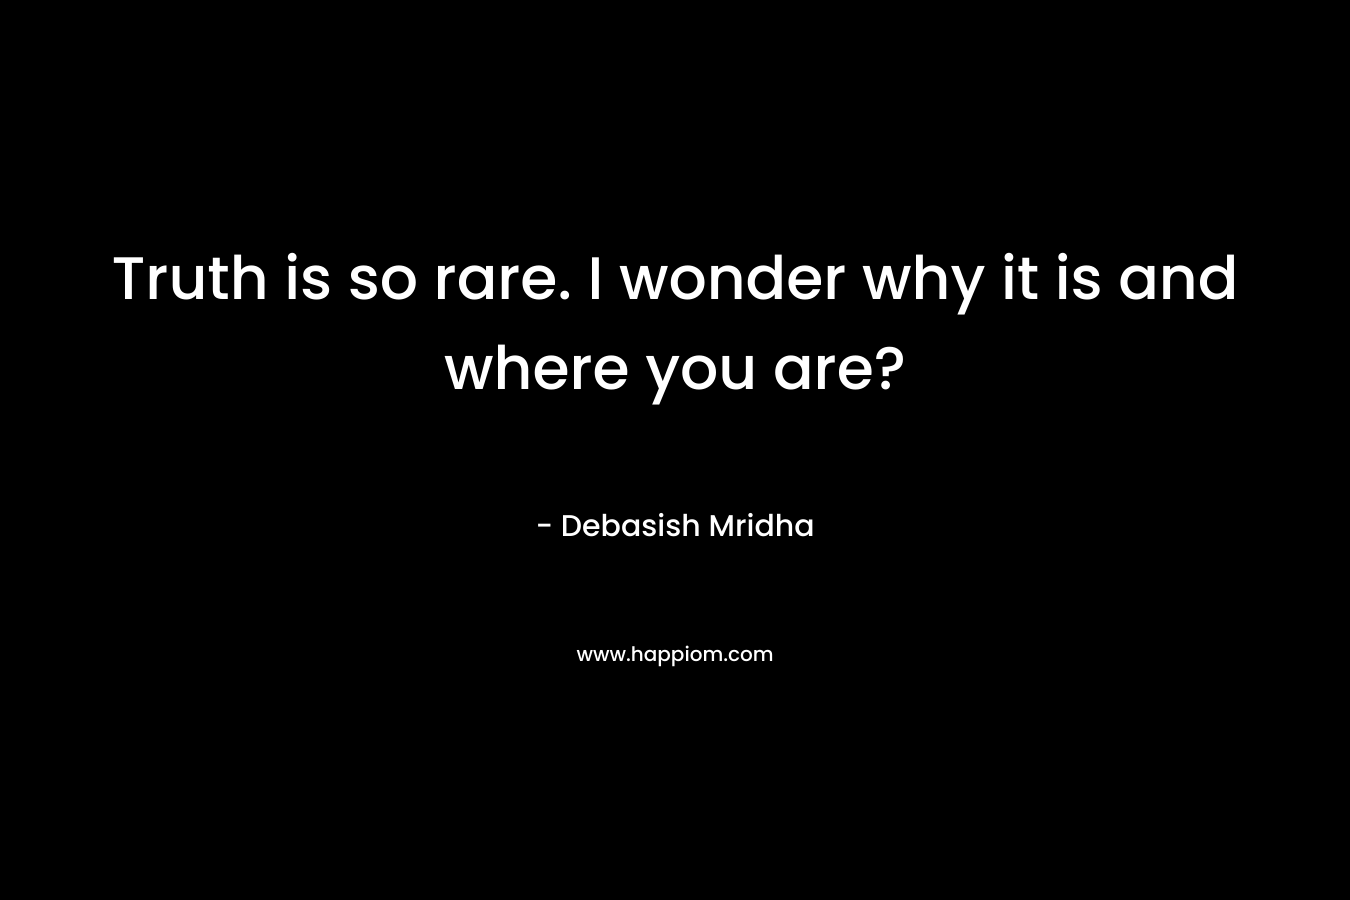 Truth is so rare. I wonder why it is and where you are? – Debasish Mridha